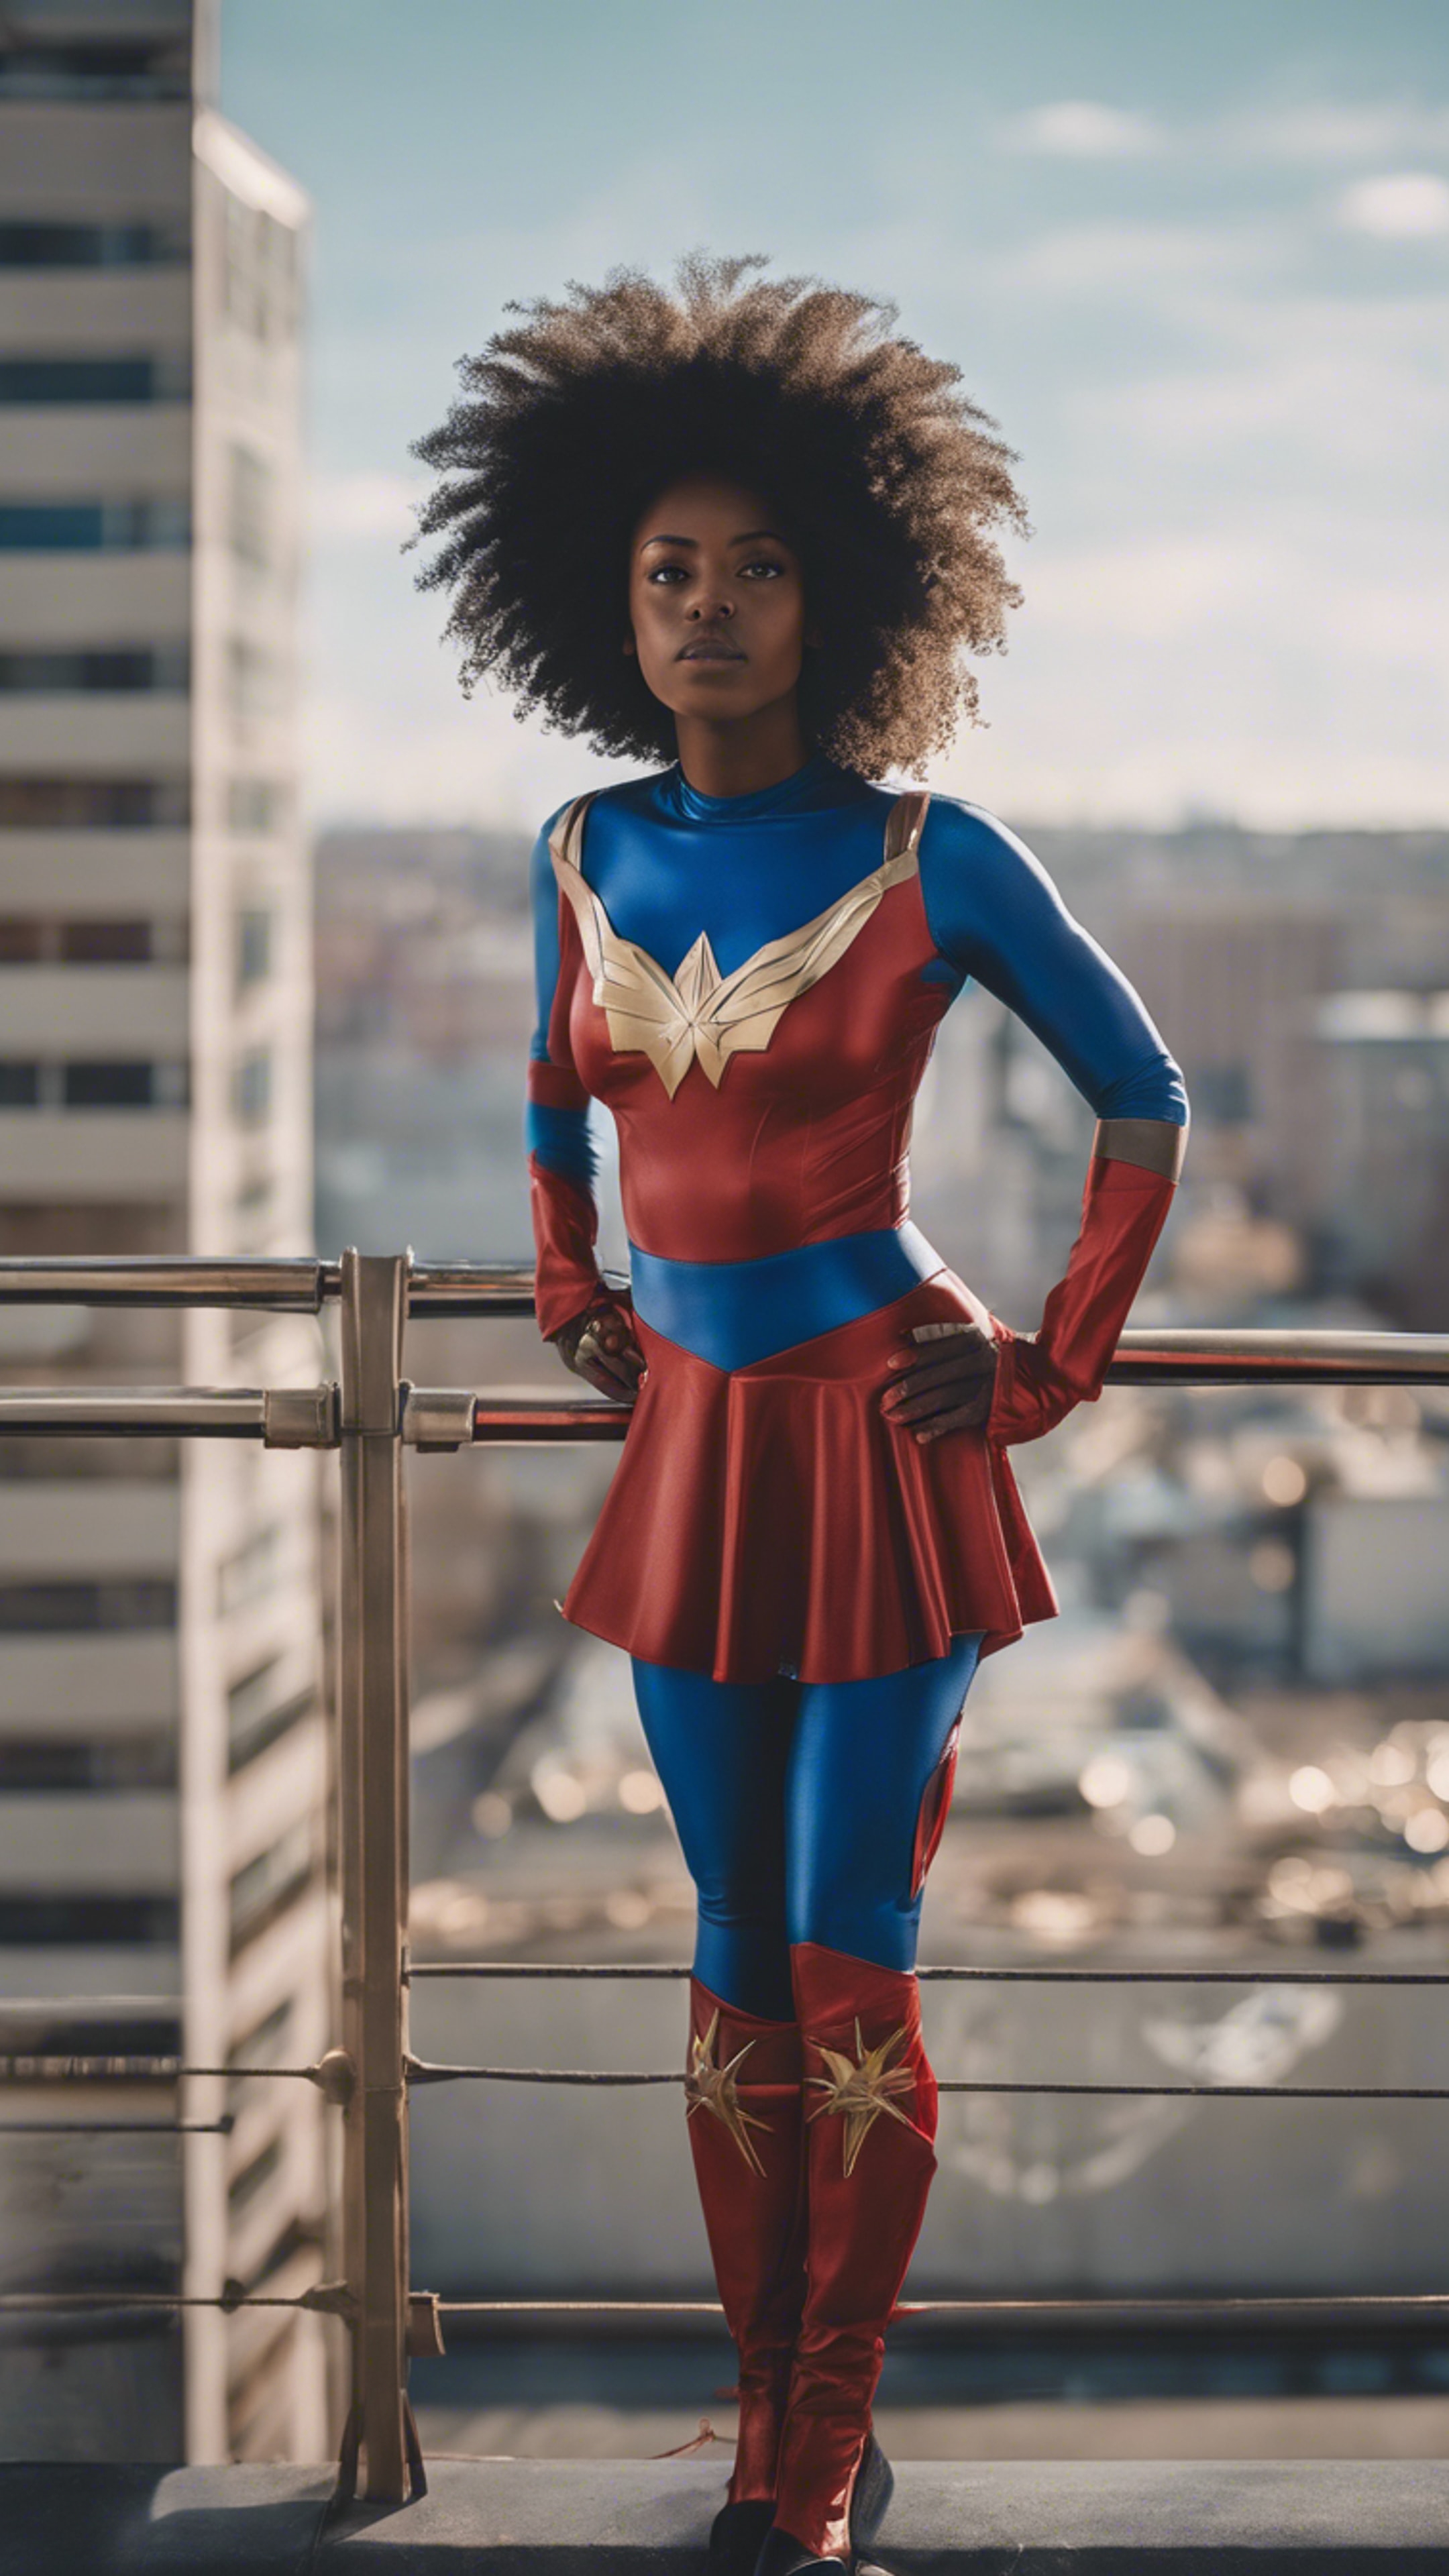 A black girl wearing a superhero costume, standing strong on top of a tall building.壁紙[591a0dfe38314cf2b9da]